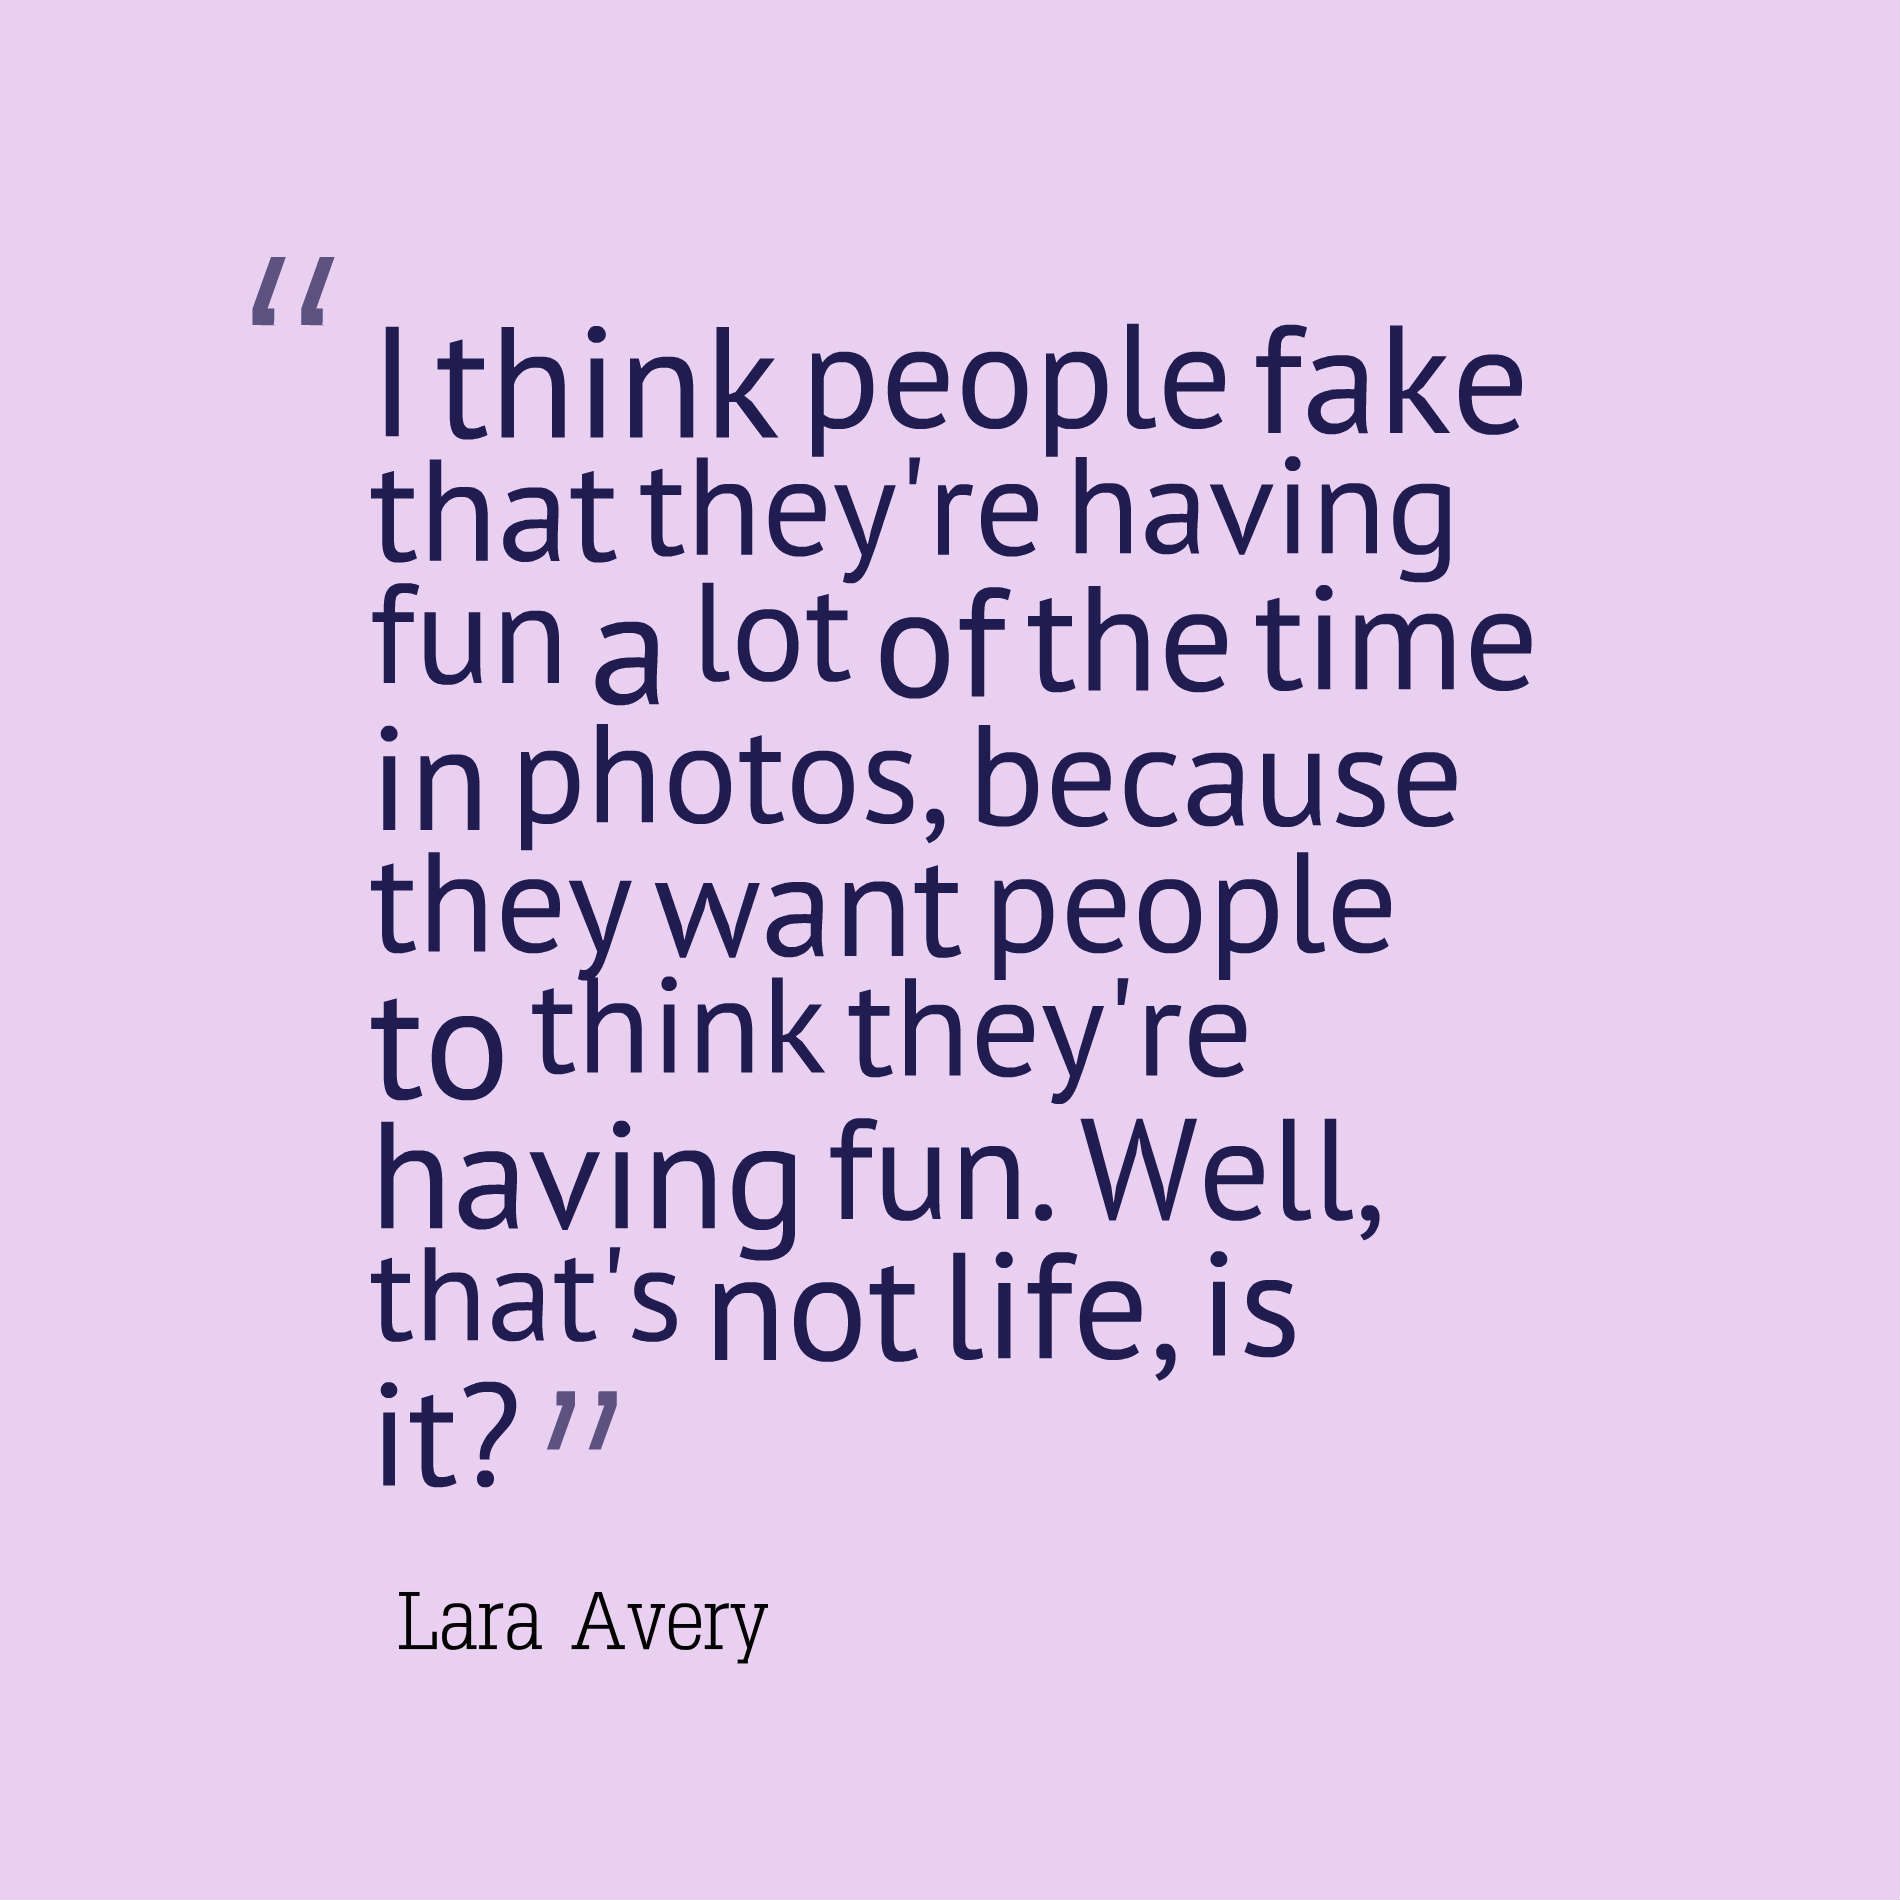 I think people fake that they're having fun a lot of the time in photos, because they want people to think they're having fun. Well, that's not life, is it?